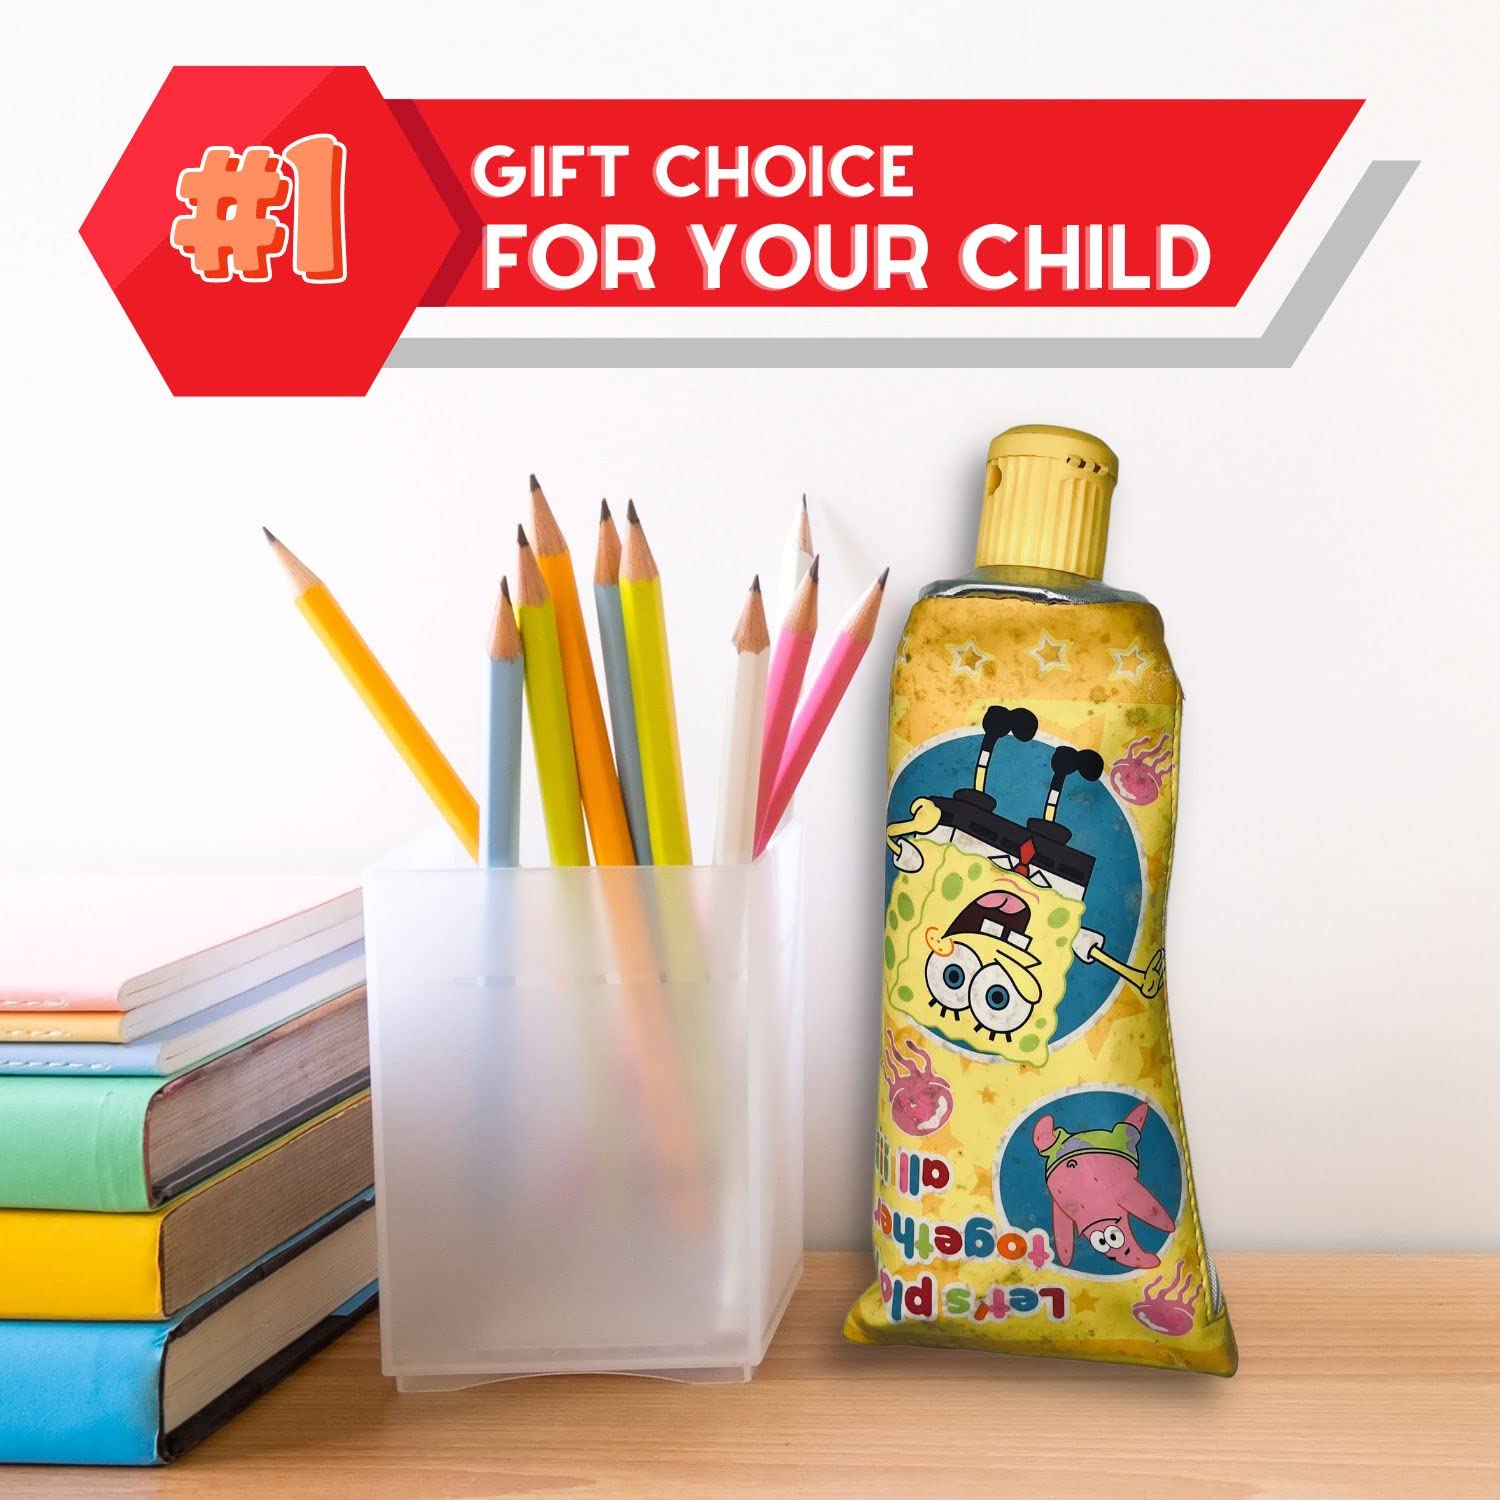 Kids Mandi pencil case, school stationery supply pouch for students.